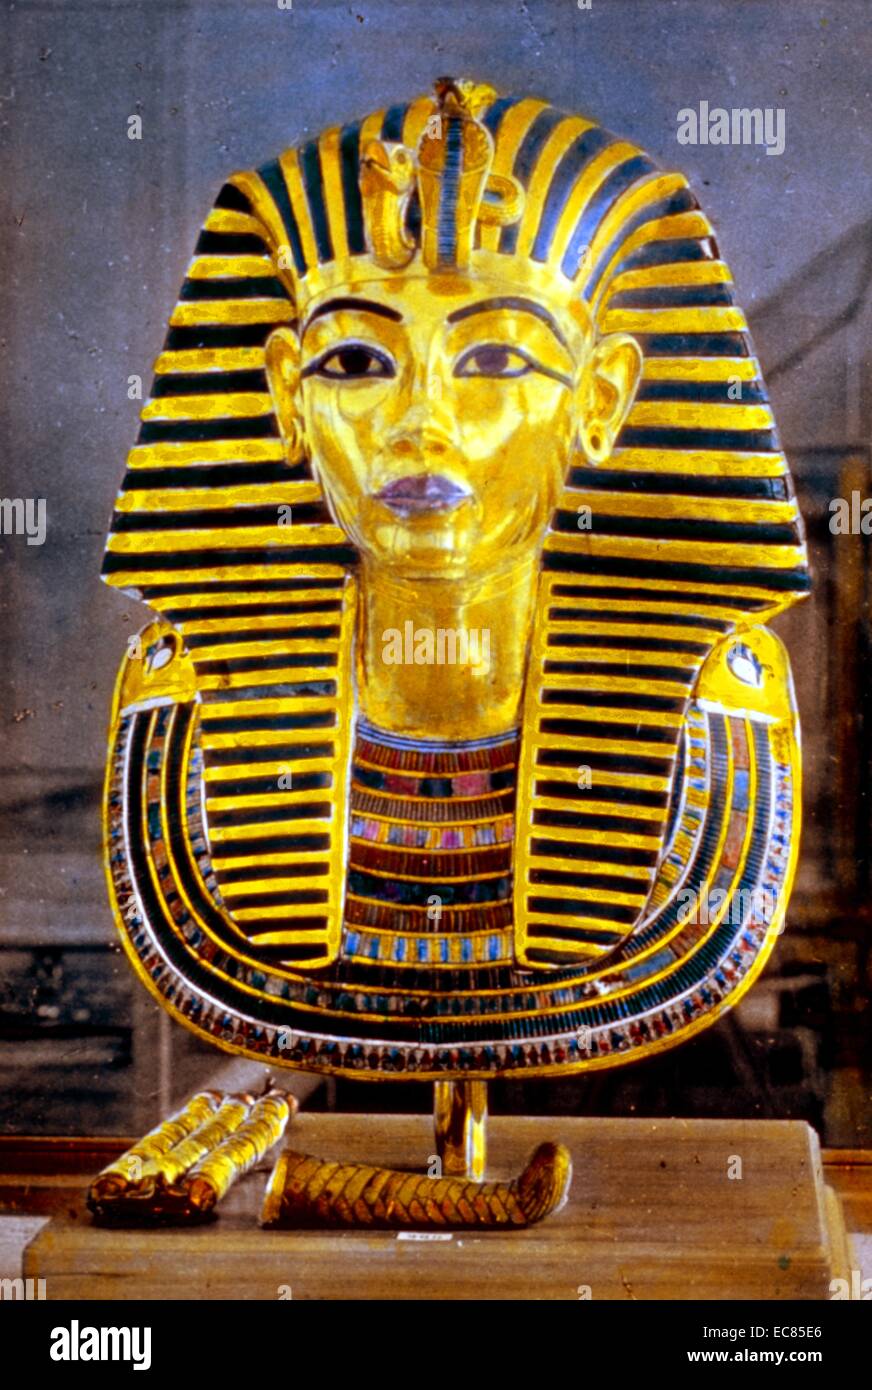 Colour photograph of the gold death mask of Tutankhamen; Egyptian pharaoh of the 18th Dynasty. Dated 1930 Stock Photo